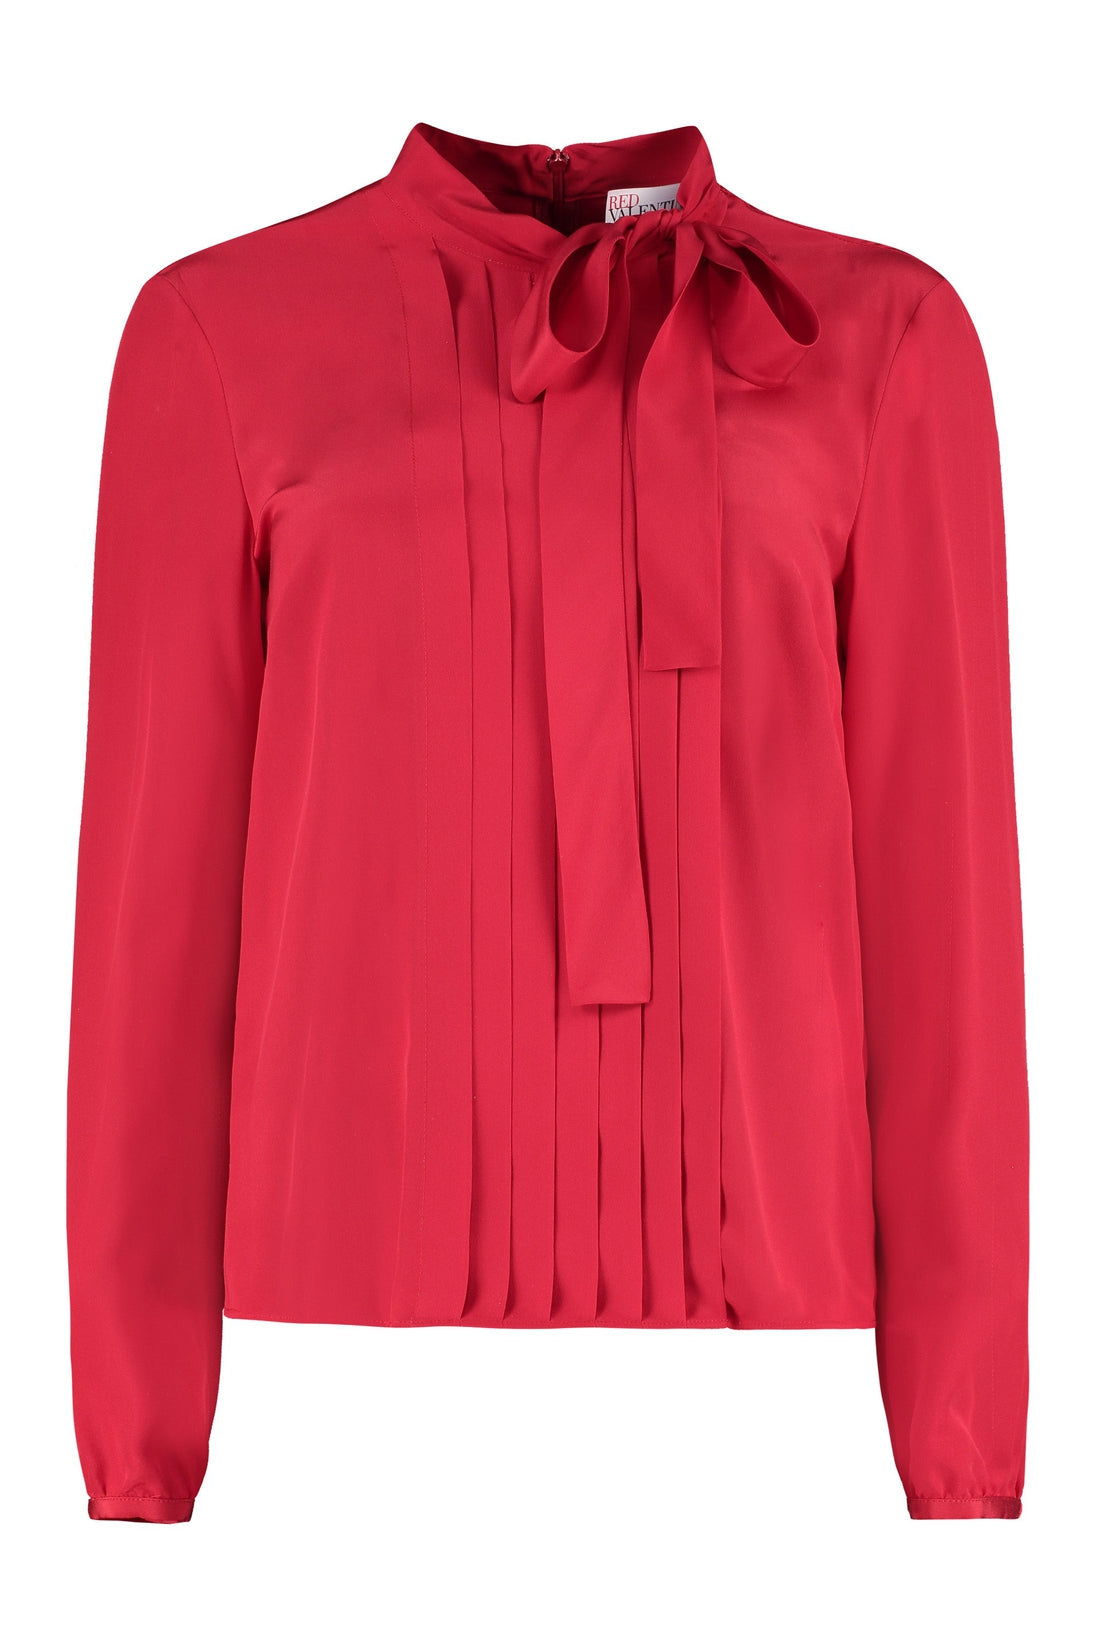 RED VALENTINO-OUTLET-SALE-Pussy-bow silk blouse-ARCHIVIST